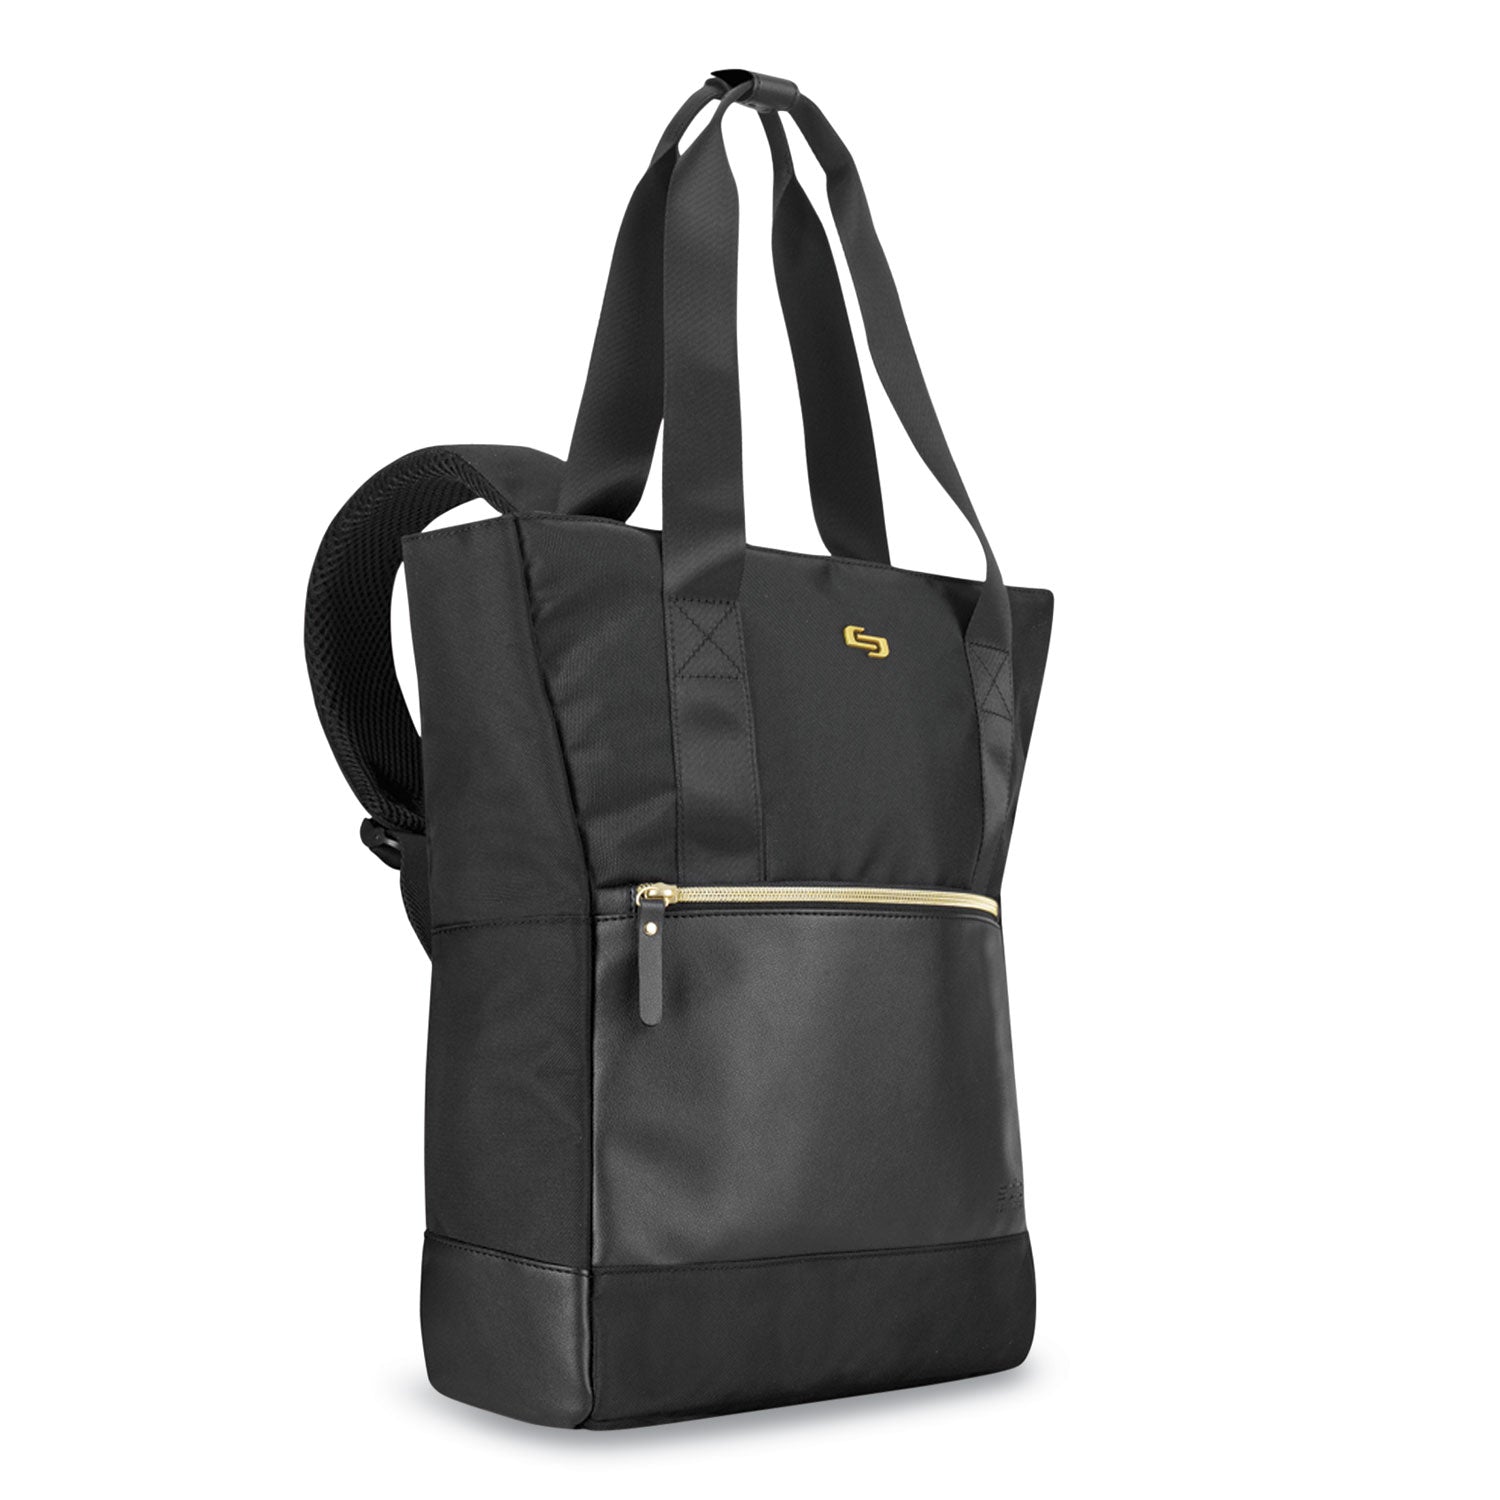 parker-hybrid-tote-backpack-fits-devices-up-to-156-polyester-375-x-165-x-165-black-gold_uslexe8014 - 2